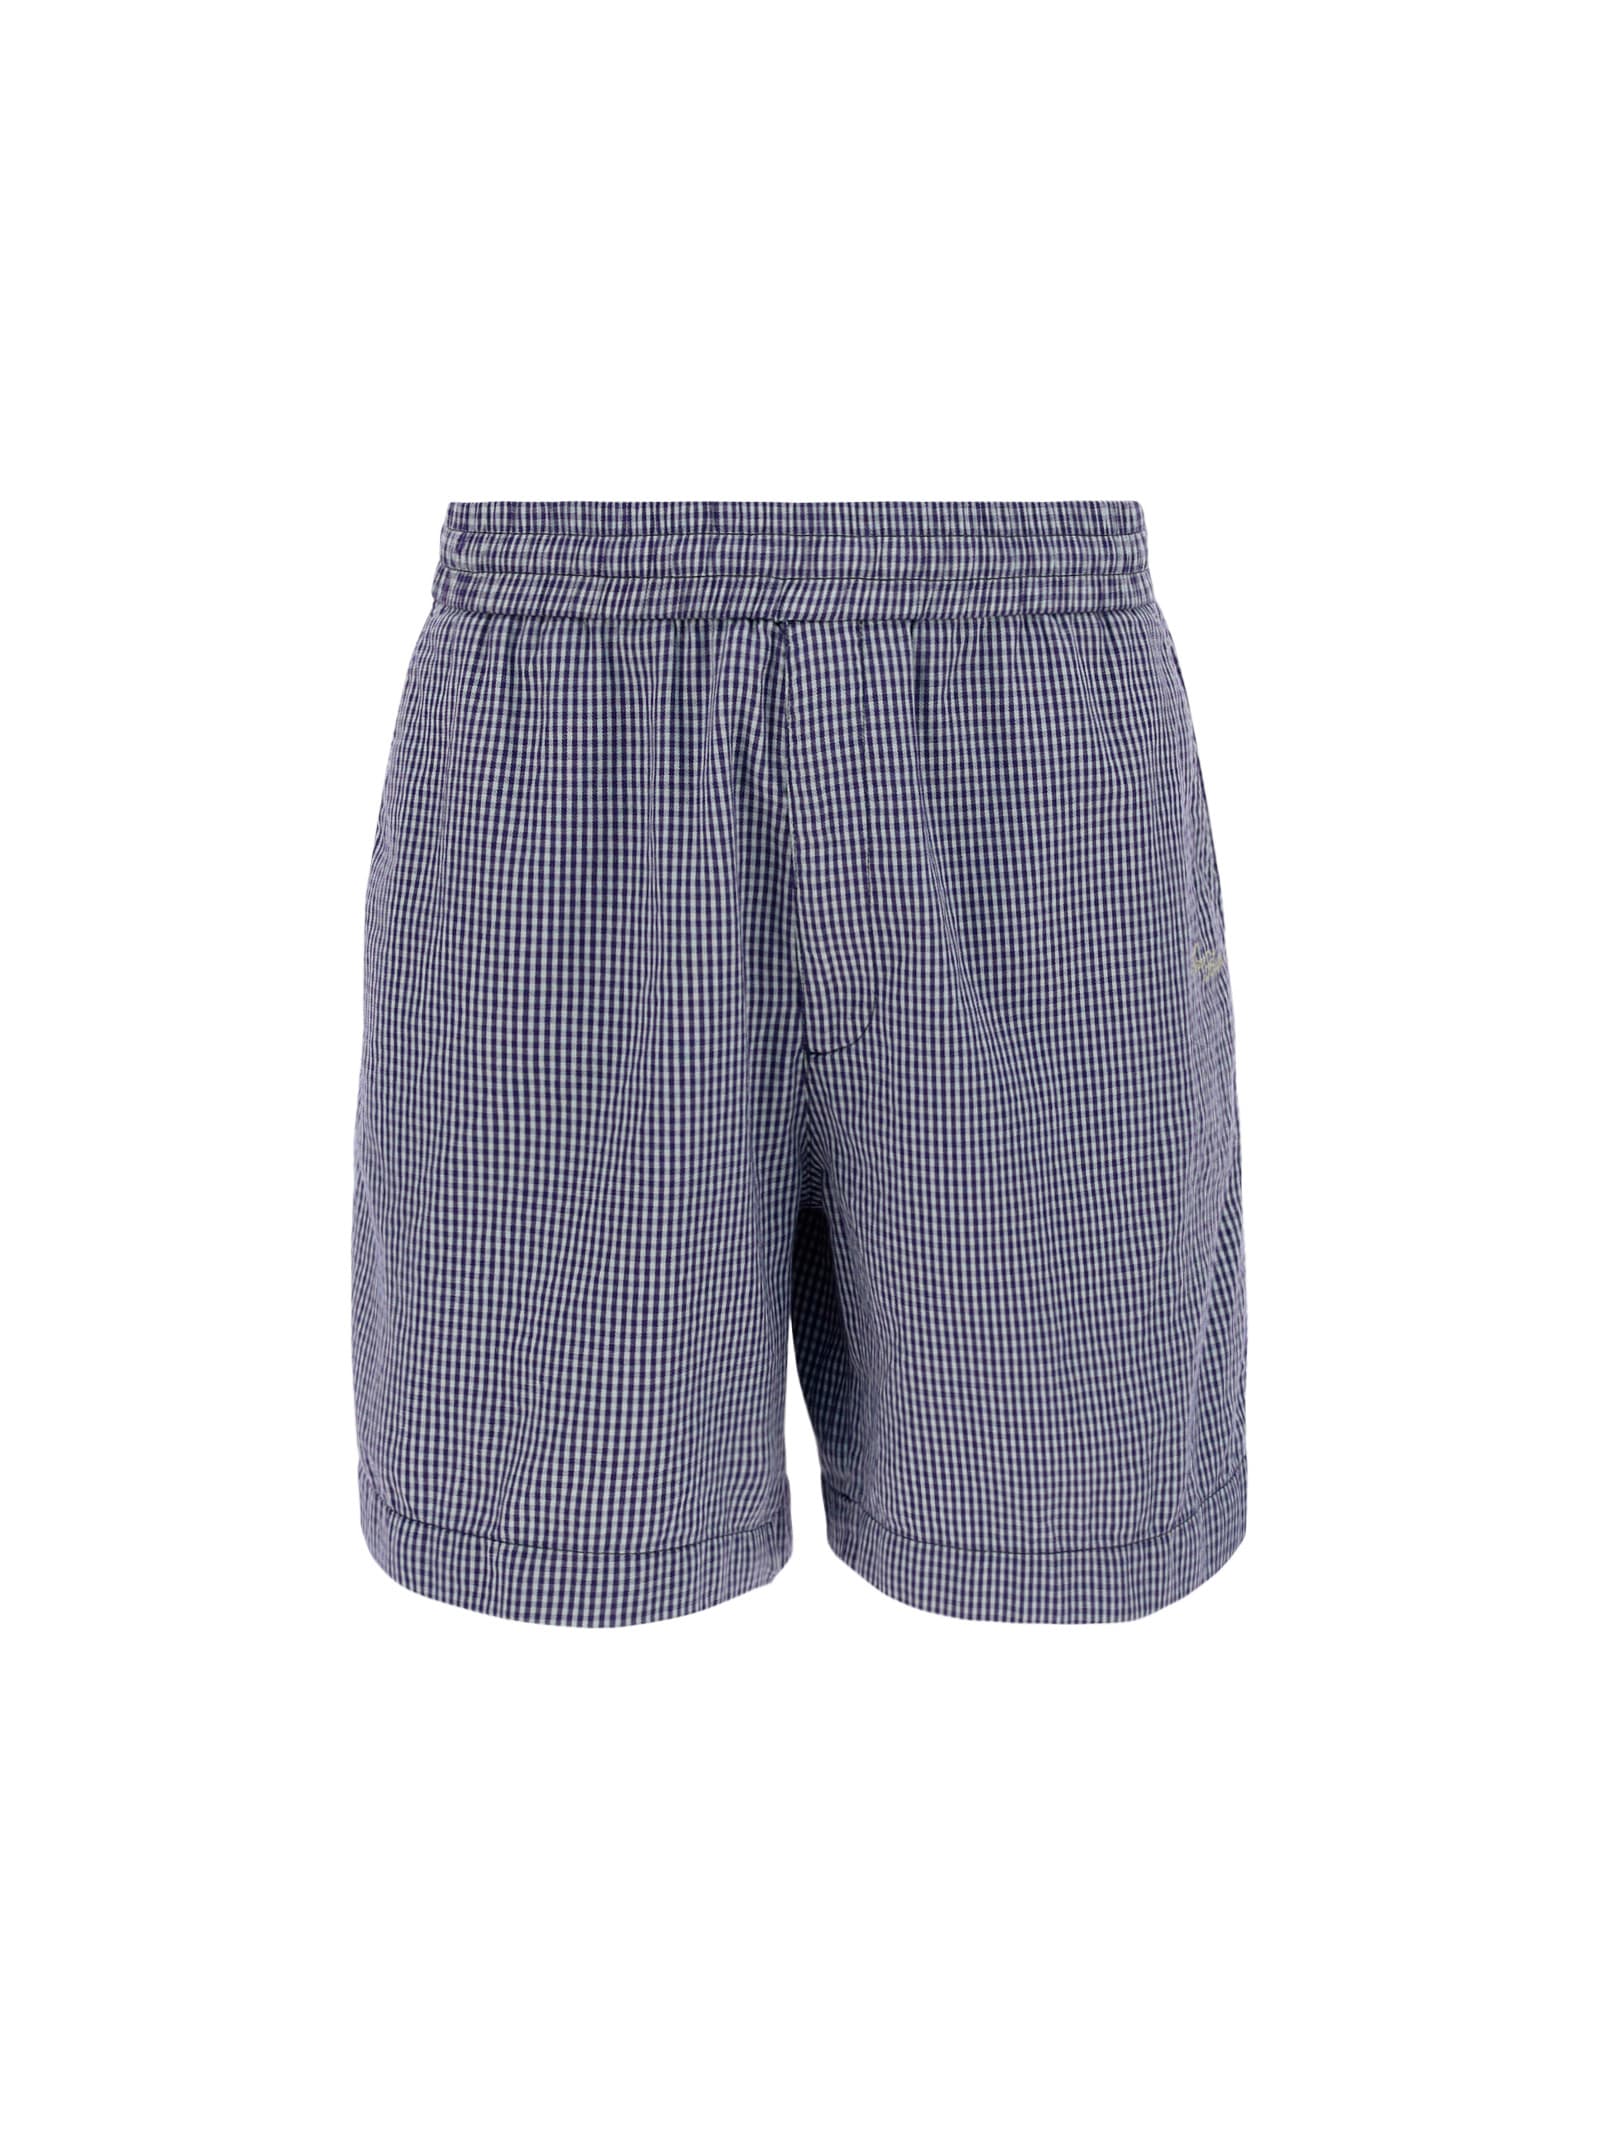 ACNE STUDIOS SHORTS BY ACNE,BE0066 CNL